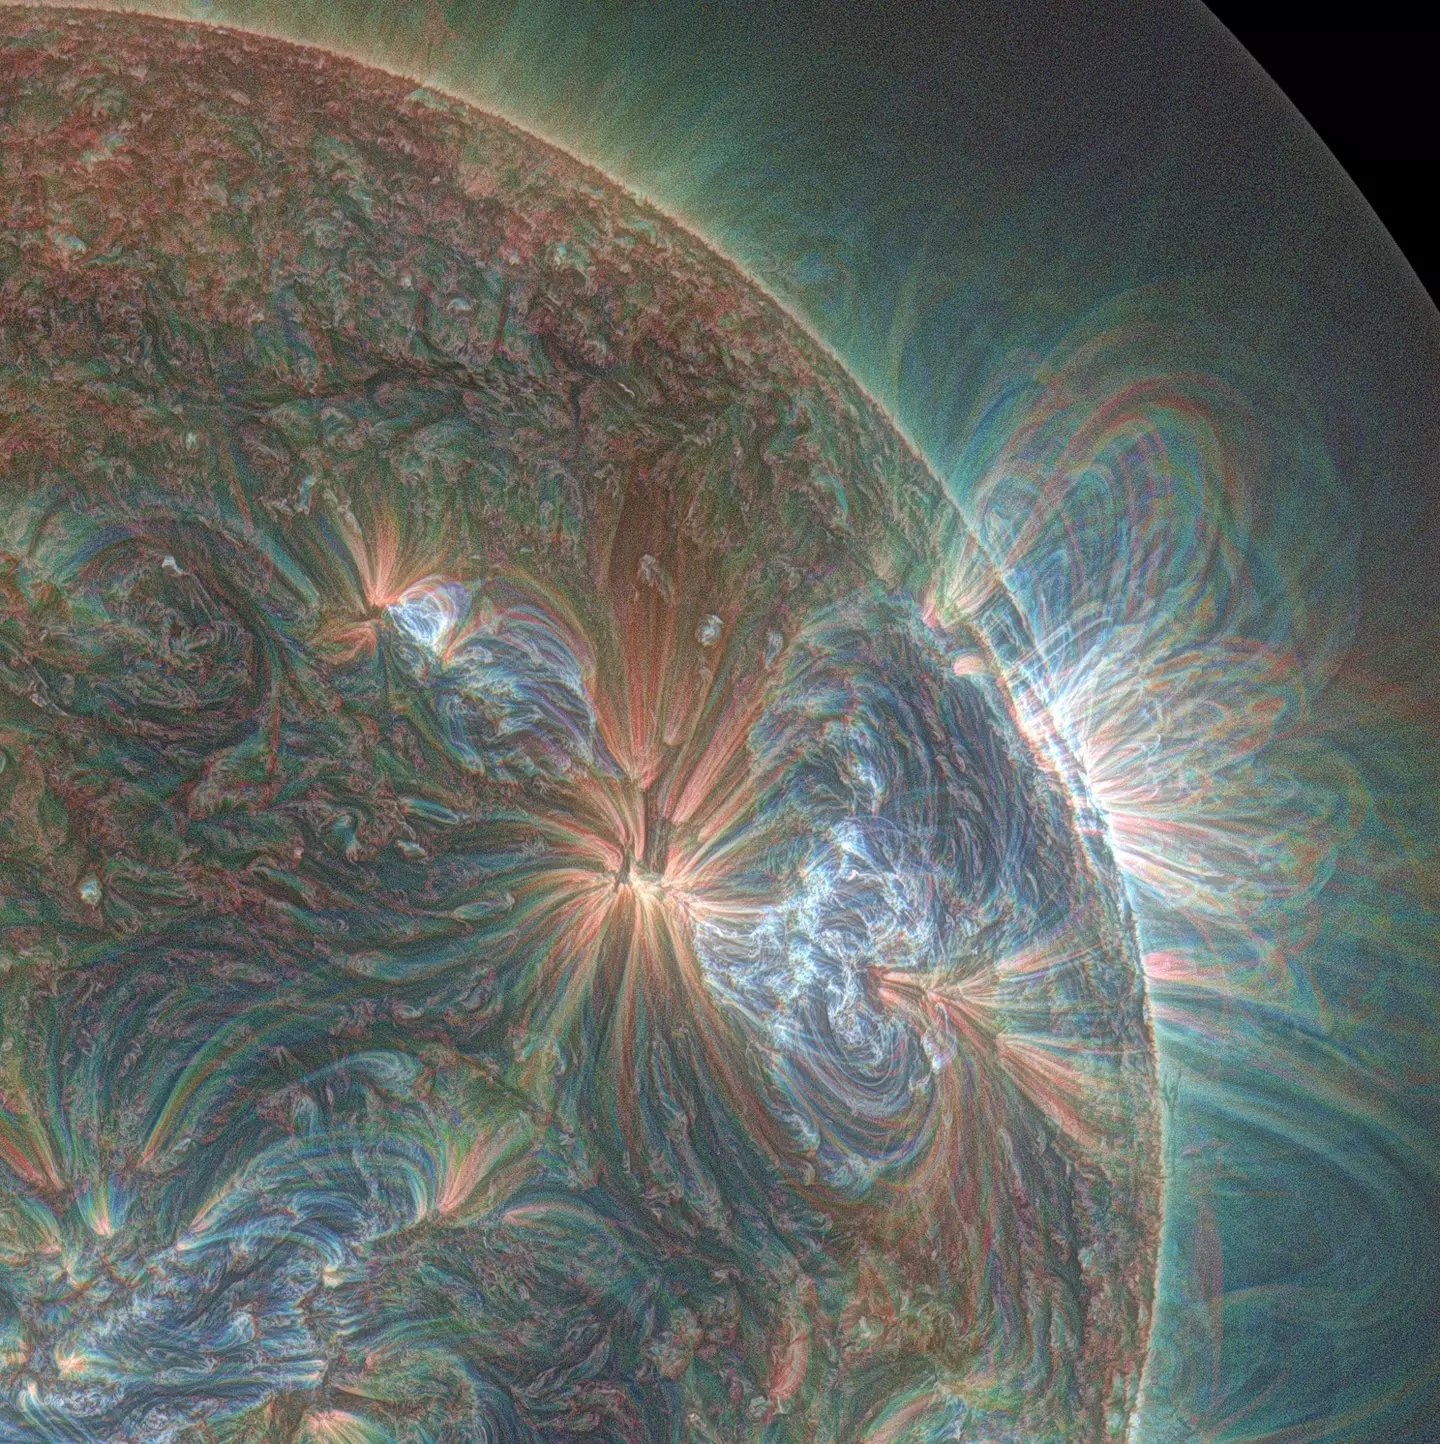 Solar storms could come to 2023 if Baba's predictions are to be believed.